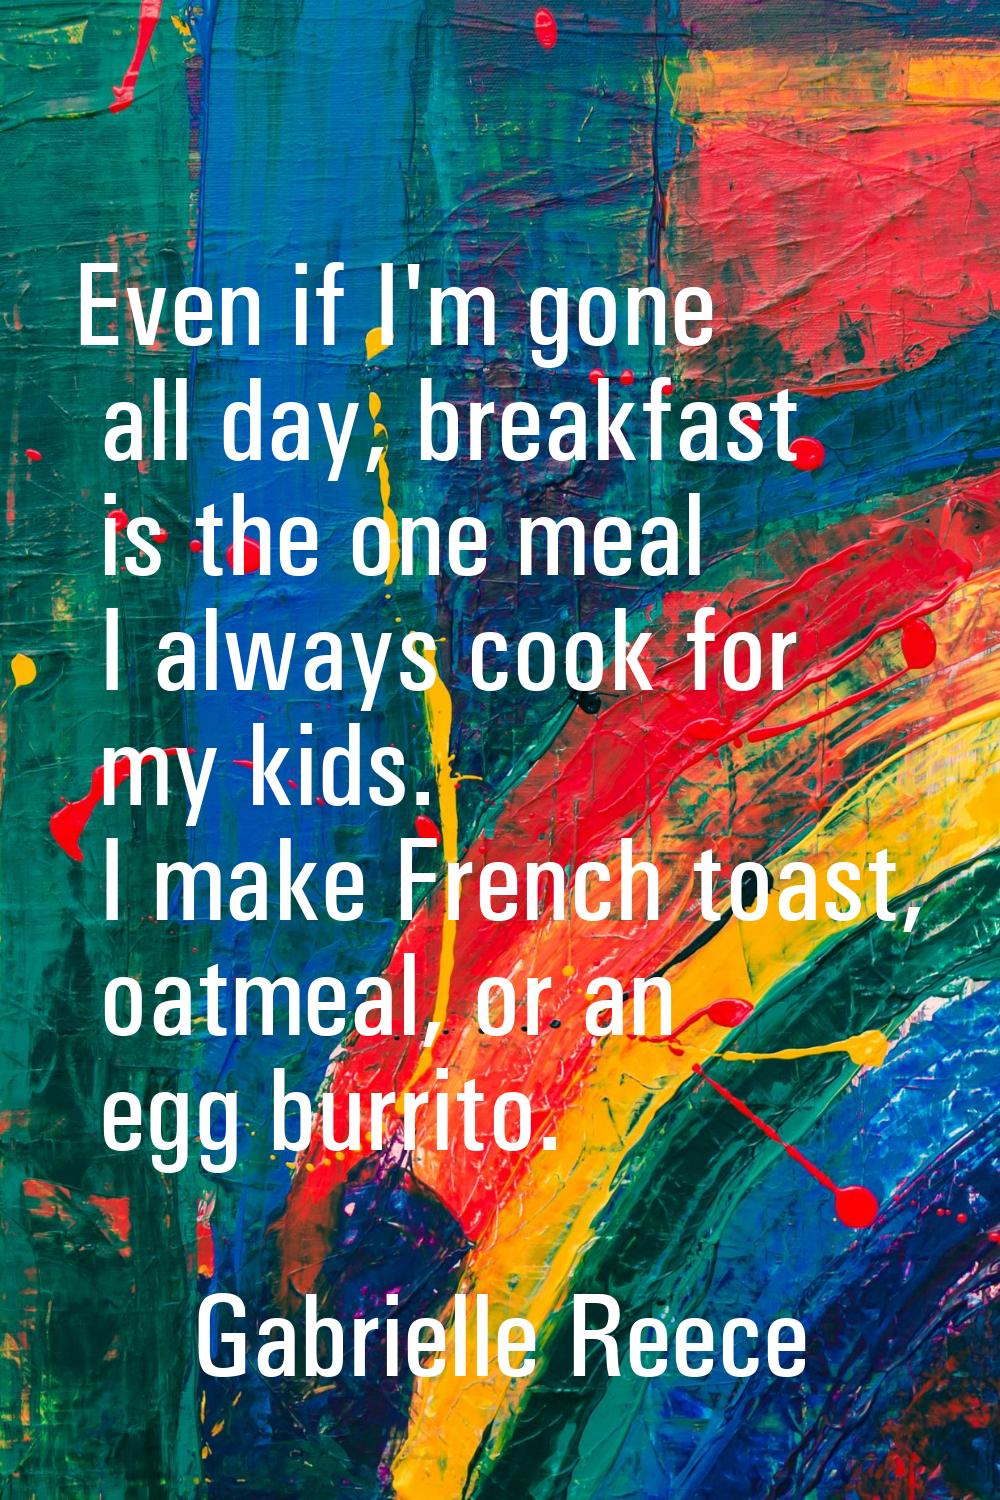 Even if I'm gone all day, breakfast is the one meal I always cook for my kids. I make French toast,